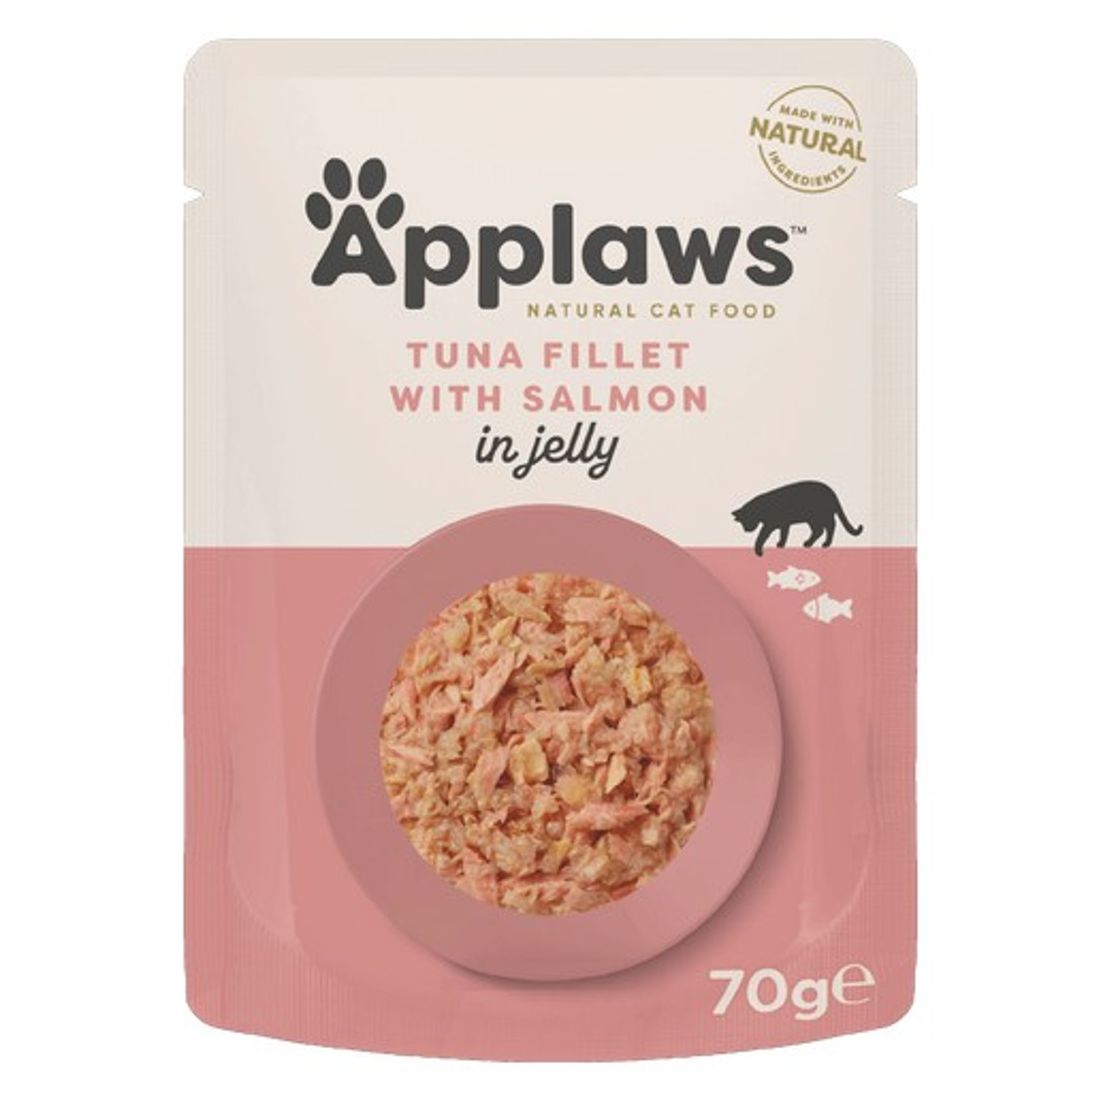 Applaws Tuna Fillet with Salmon Jelly Pouches